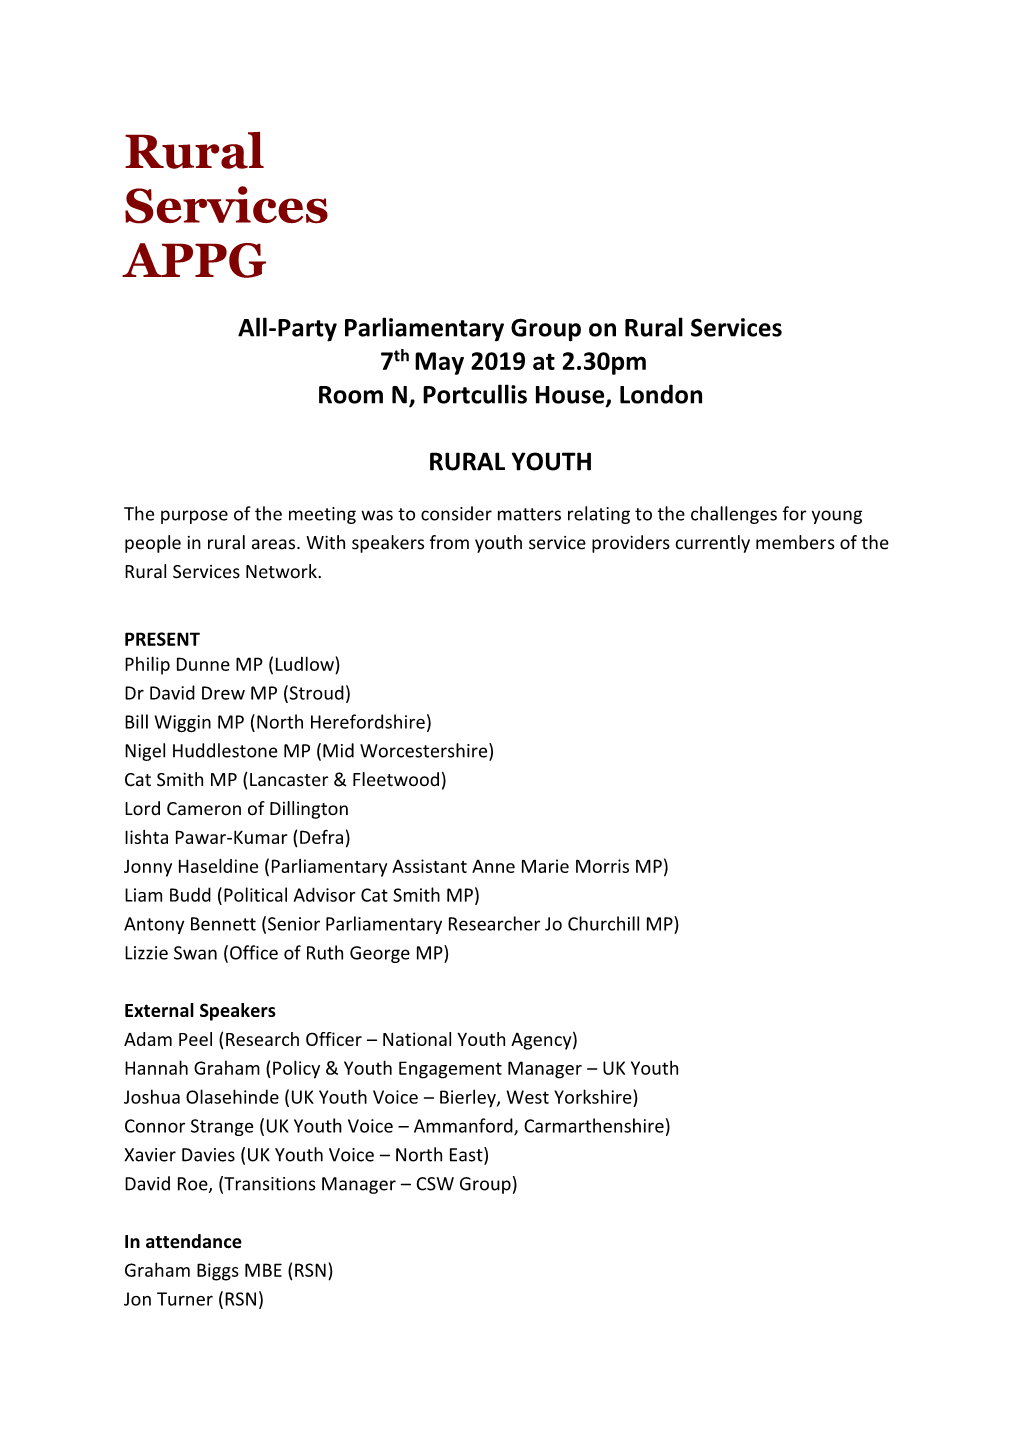 Rural Services APPG